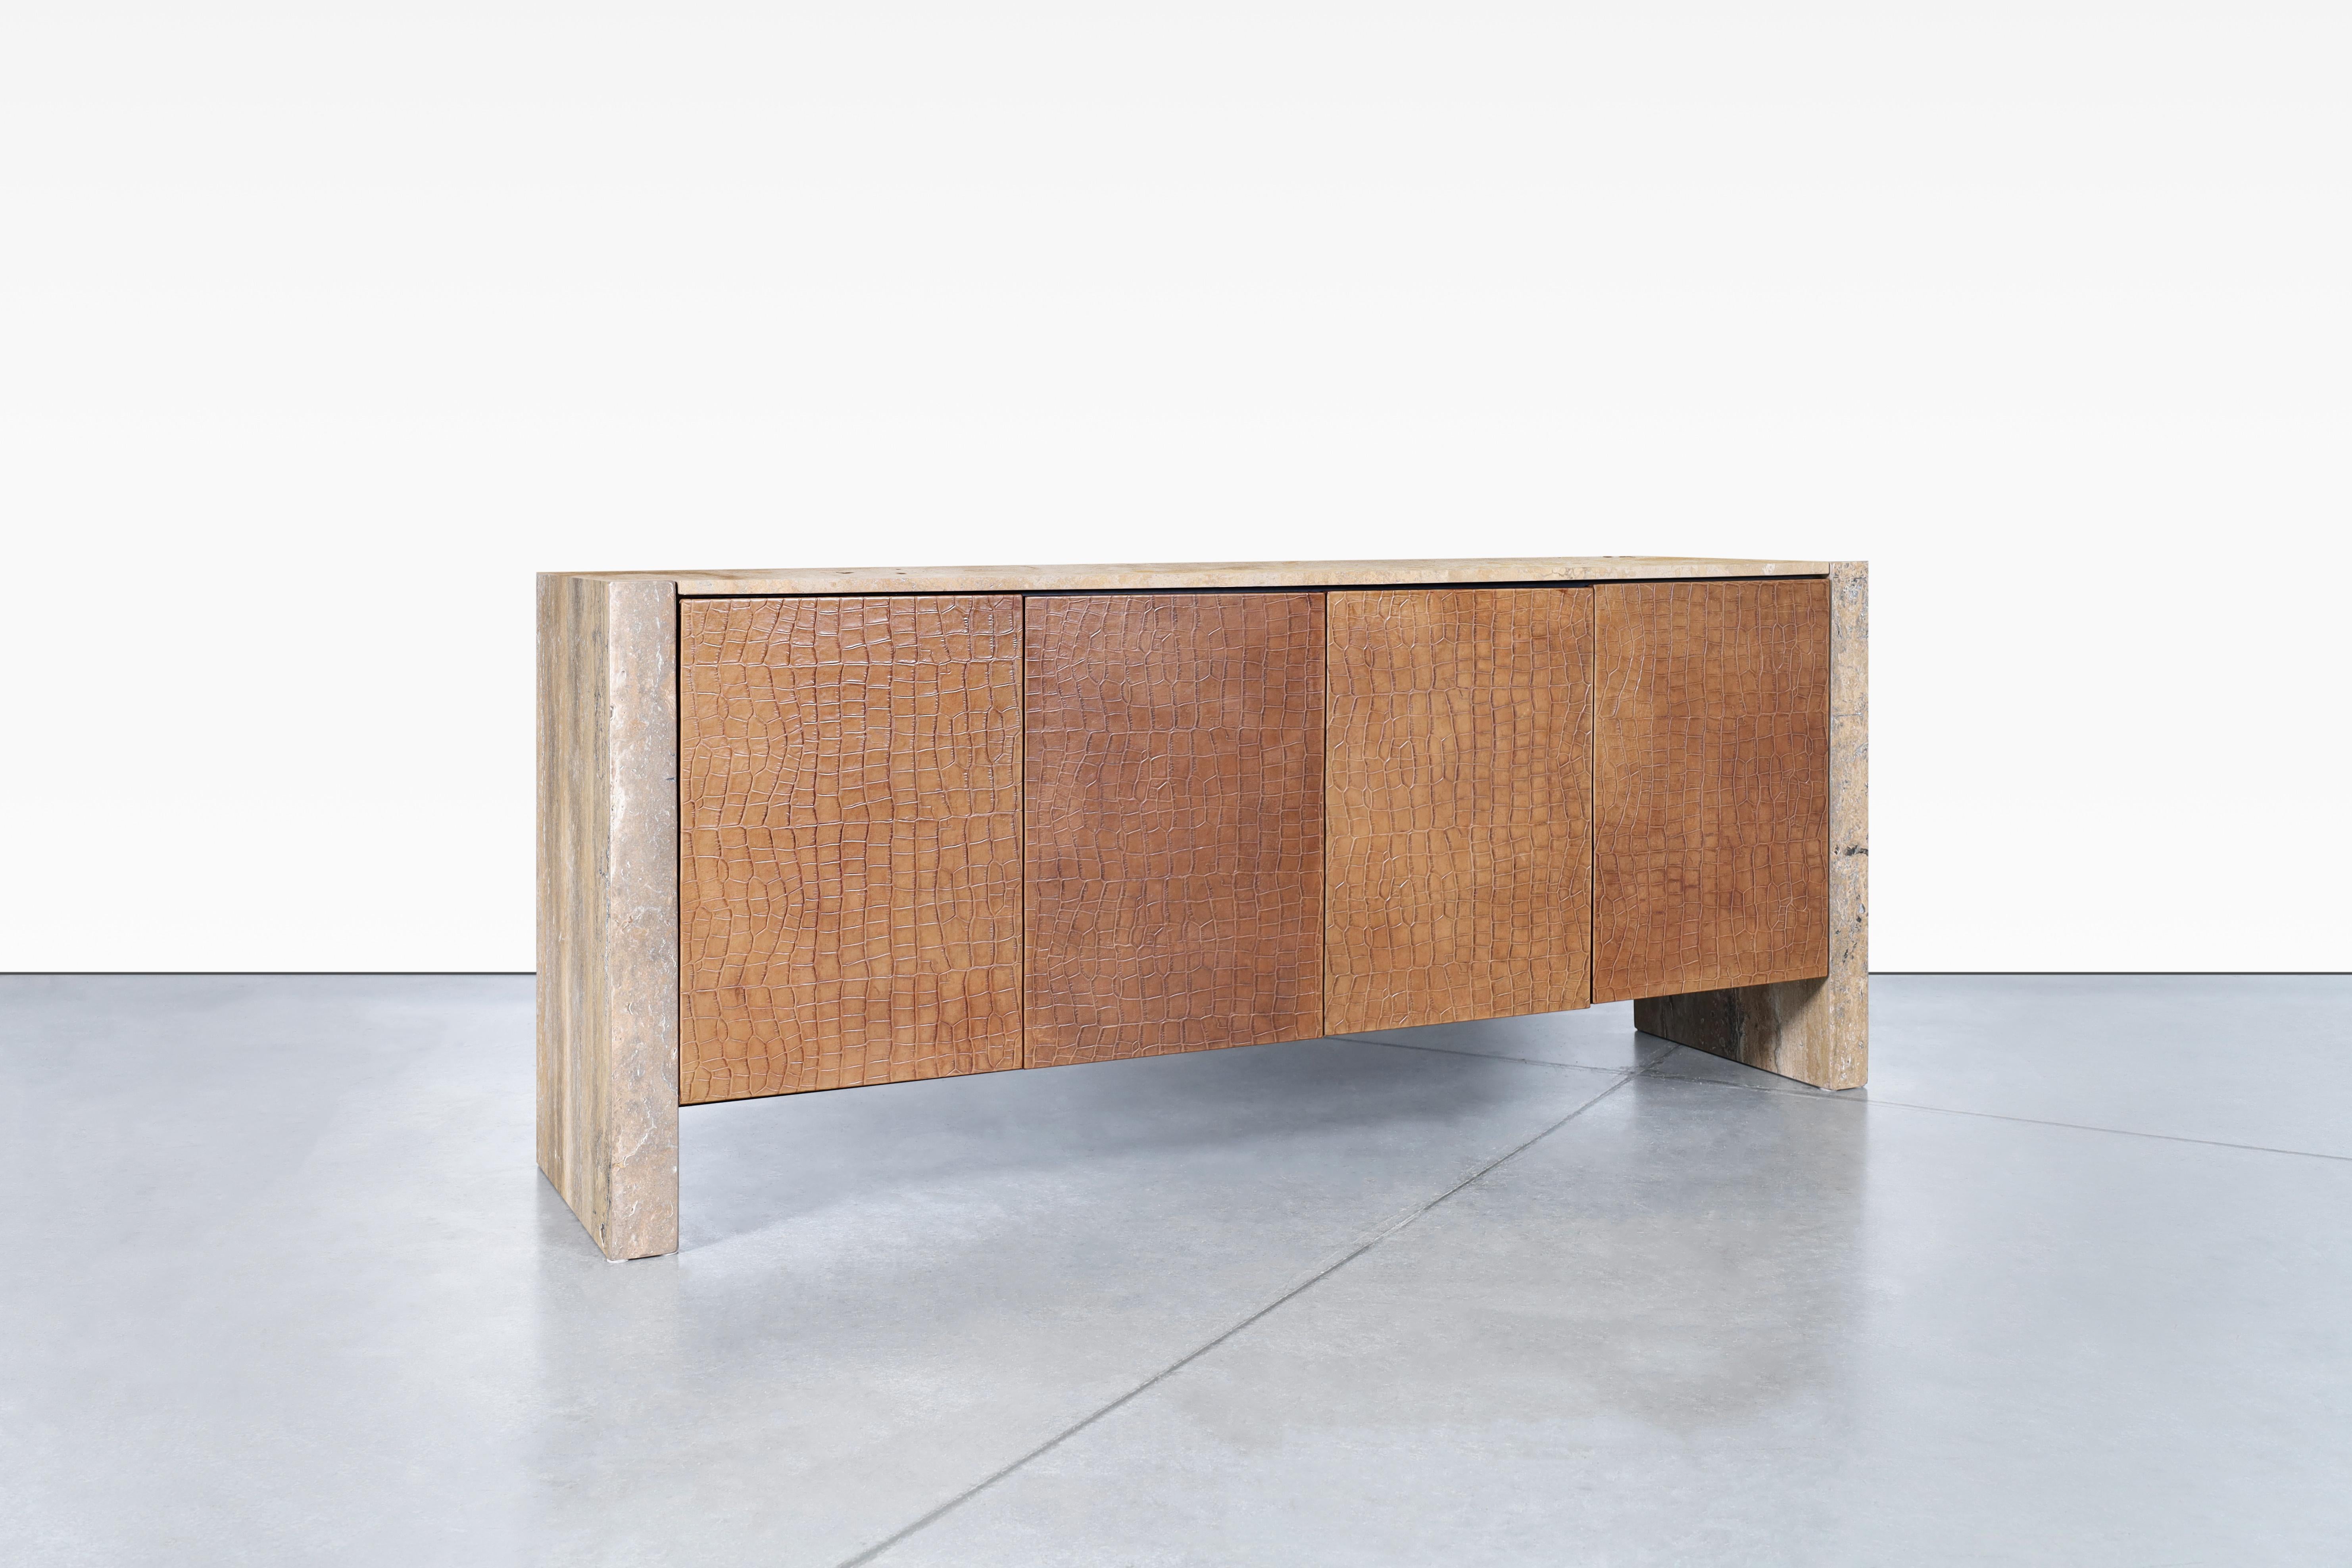 This beautiful vintage credenza is a true statement piece for any room. The luxurious crocodile-textured leather on the doors exudes elegance and refinement. The travertine sides and top provide a sturdy and durable base while also lending a touch